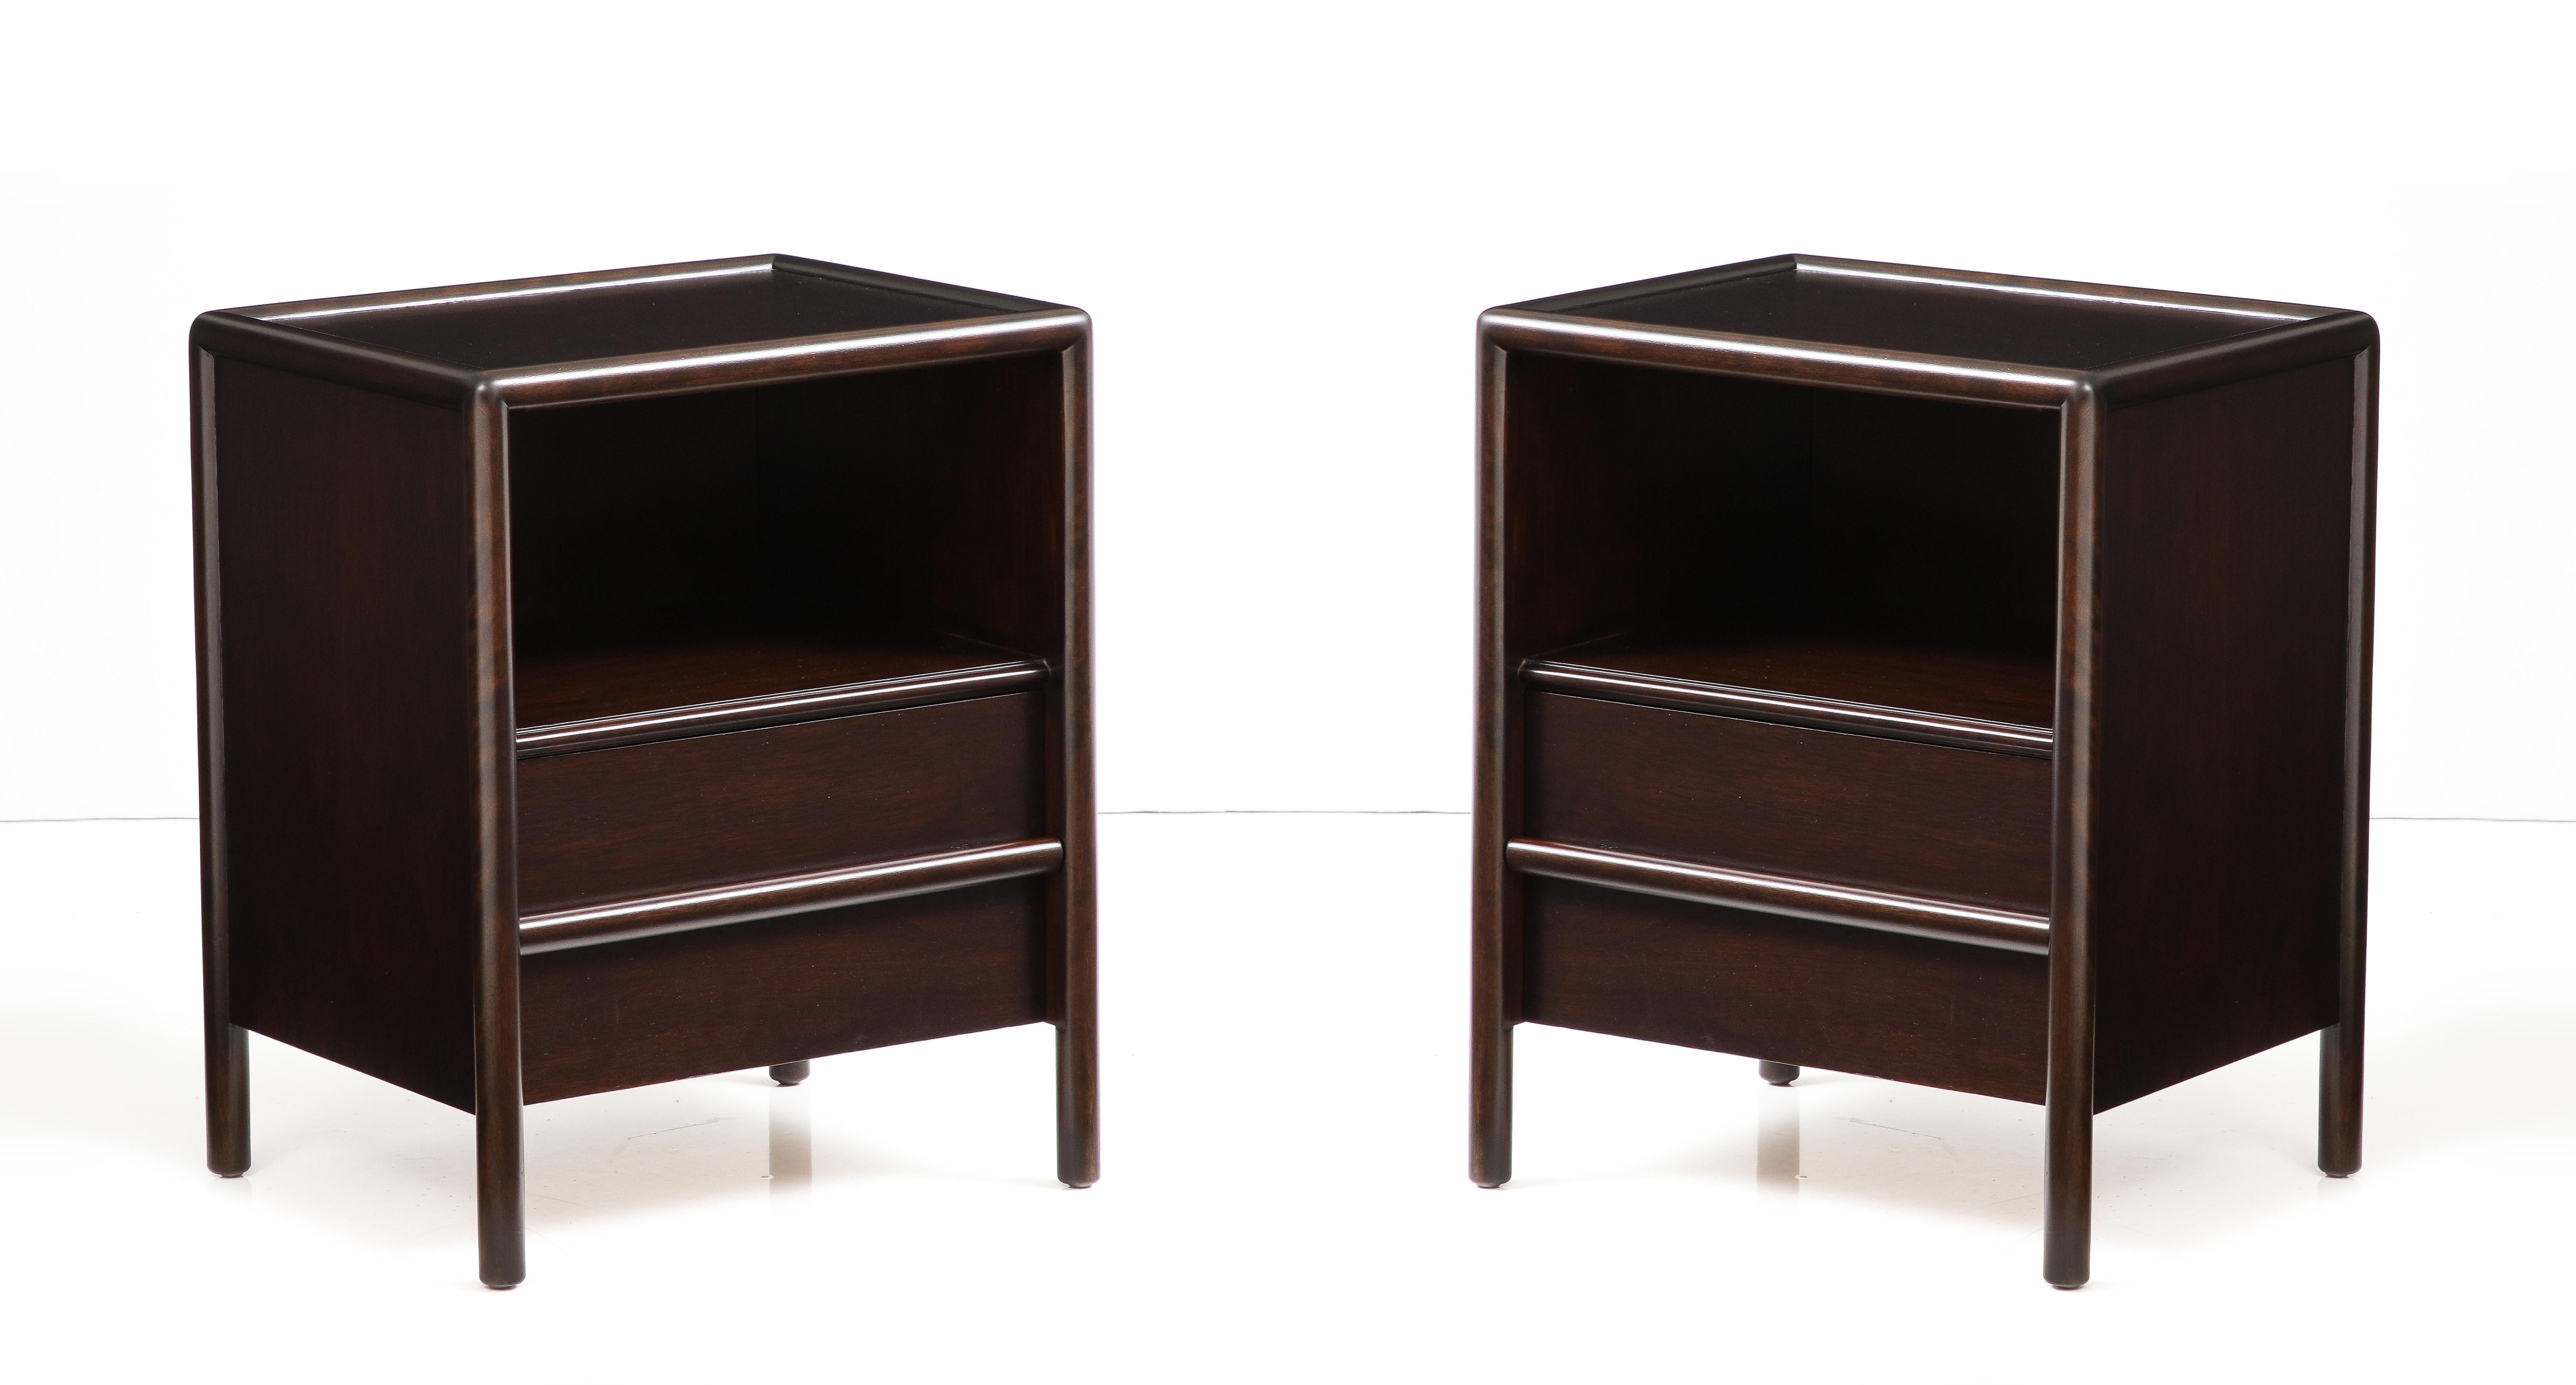 Pair of Modernist nightstands restored in a custom sable brown finish featuring a bottom drawer and storage compartment. Designed by Gibbings for Widdicomb. Labeled.